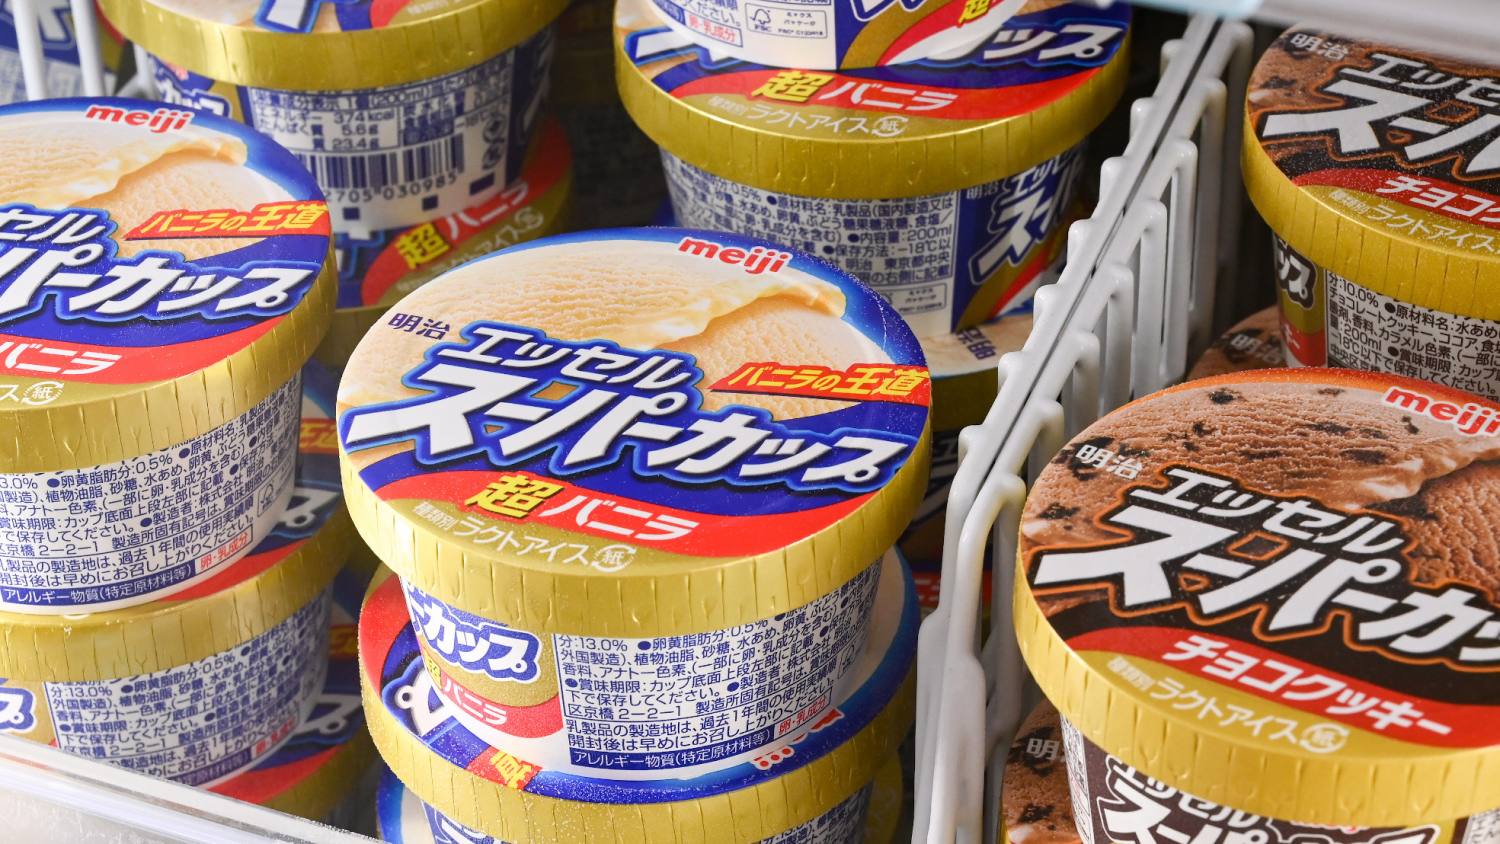 Japan's Ice Cream Industry Booms with Record Sales and Exports